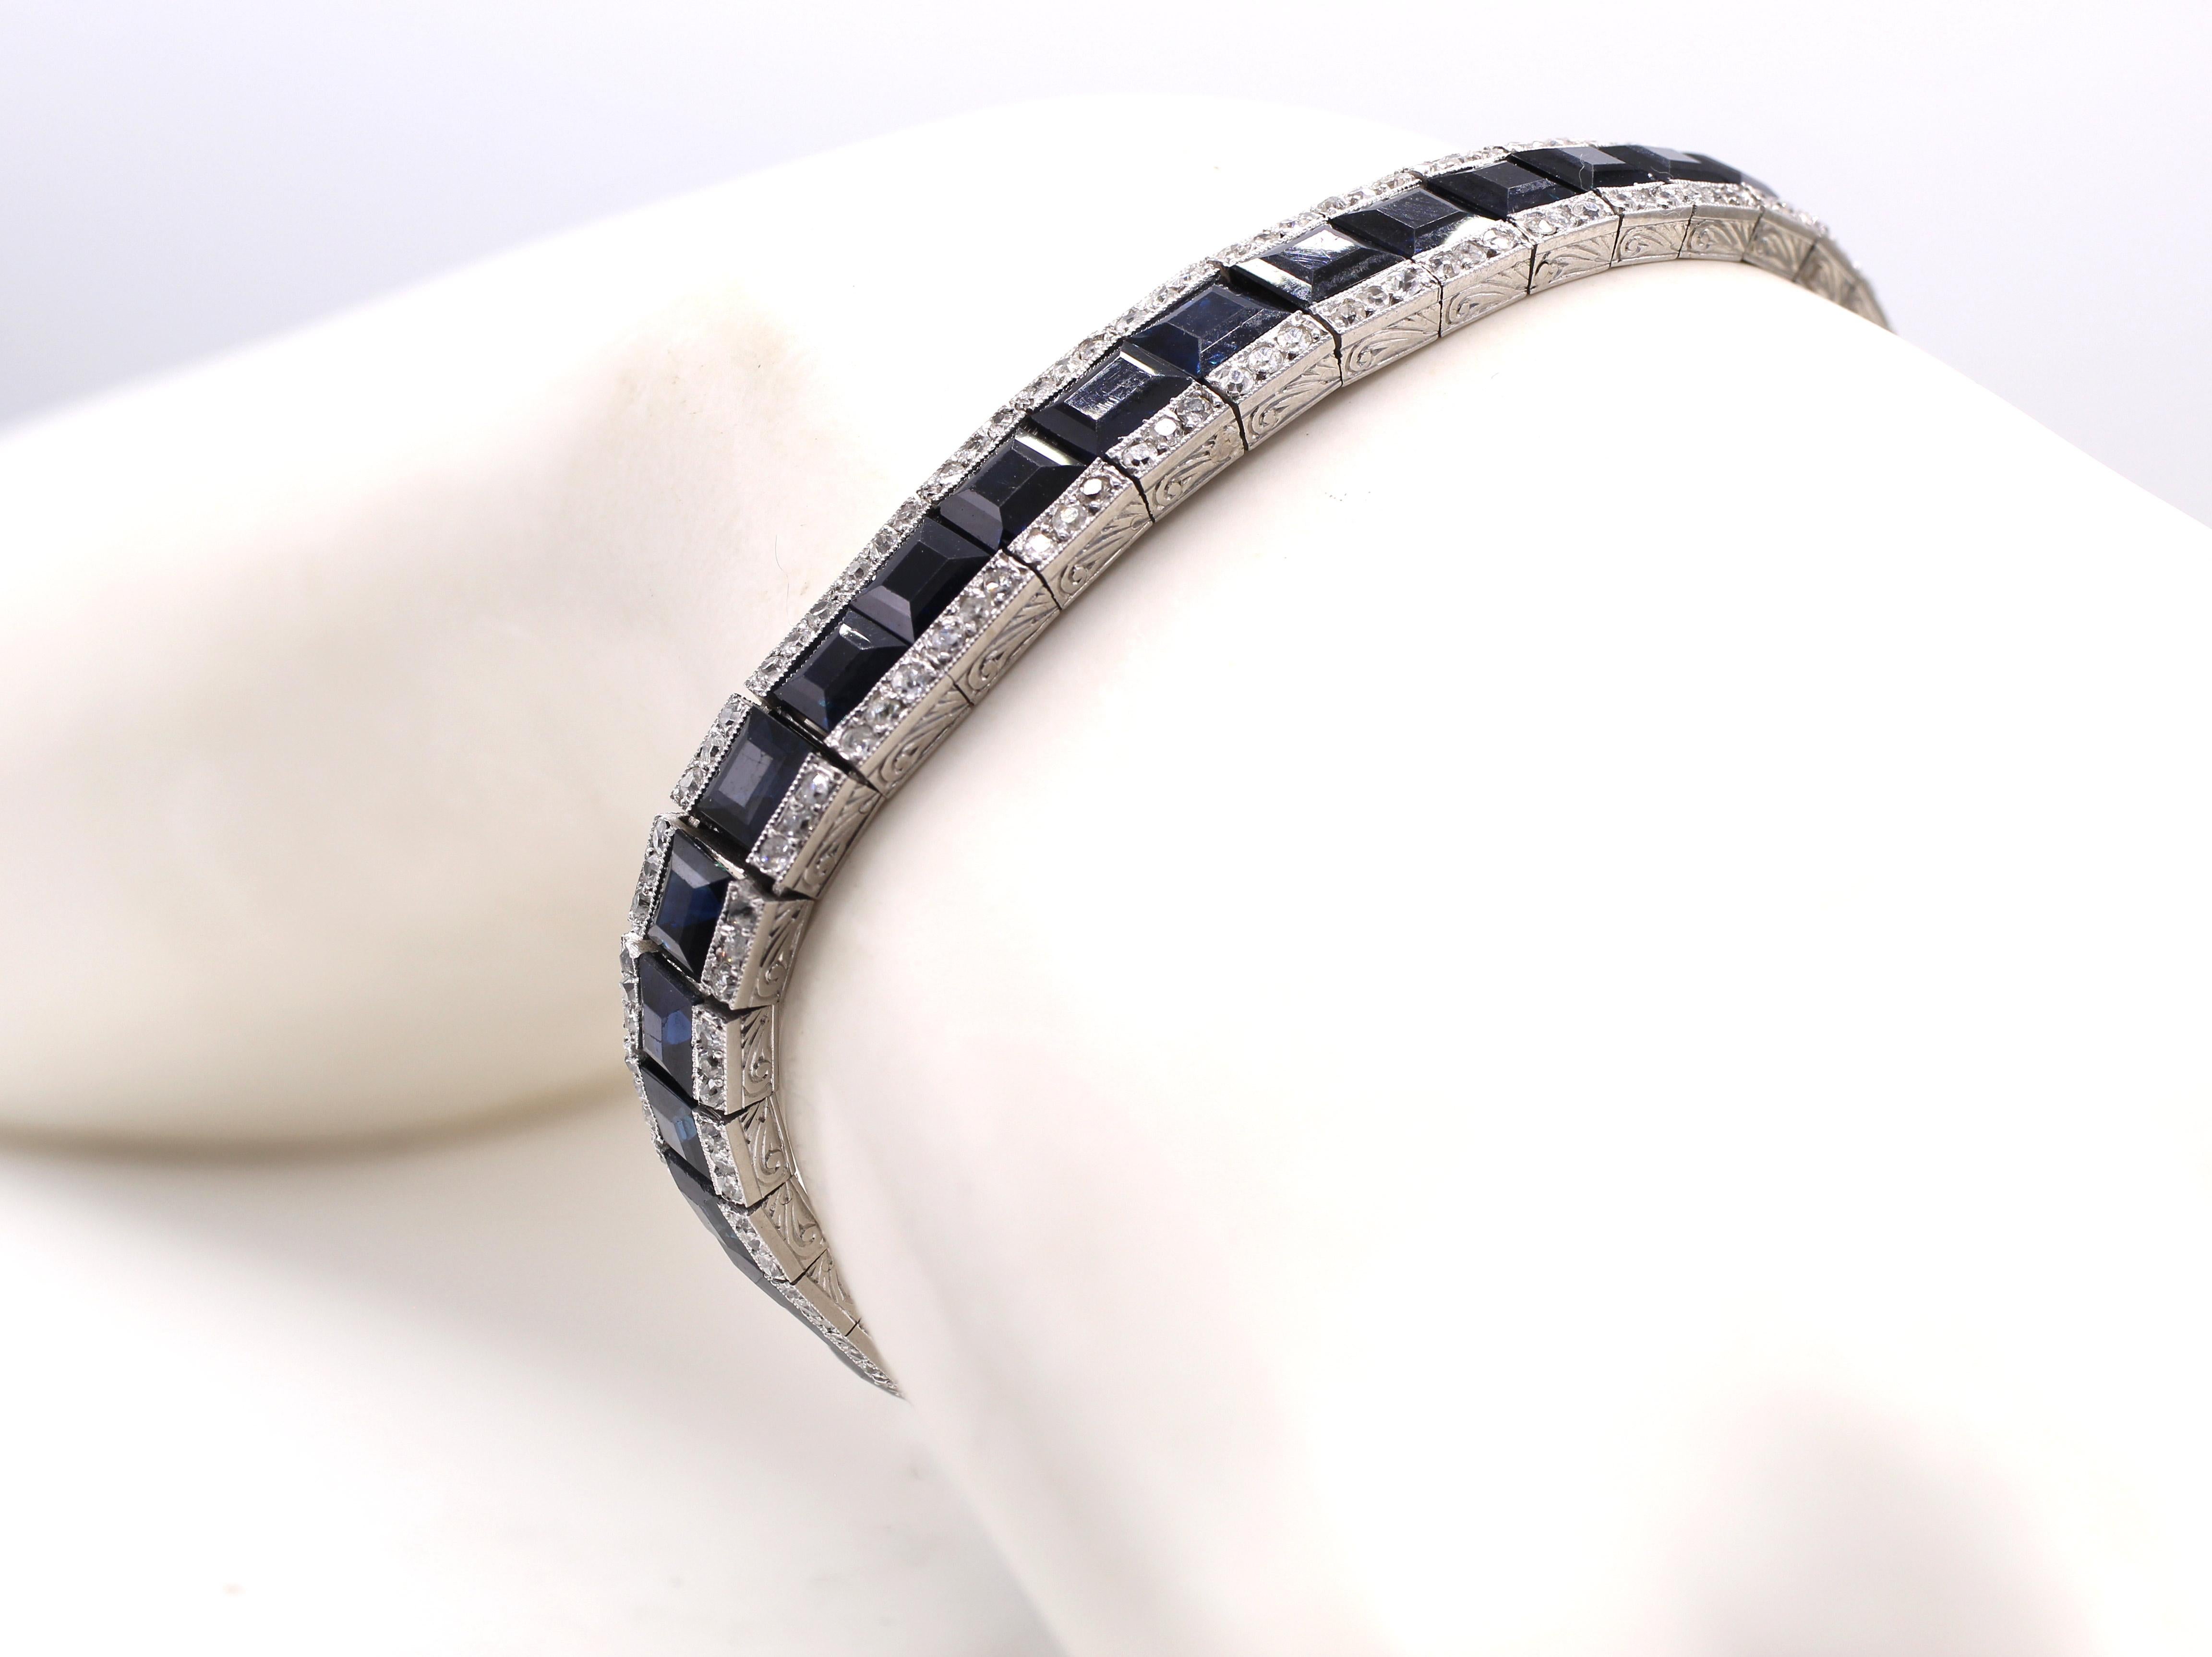 Fine Art Deco bracelet from ca 1925 made in France. Set in platinum with a center channel of 41 dark blue well saturated step cut sapphires and embellished with small bright white old cut round diamonds on either side. The sides of this gorgeous